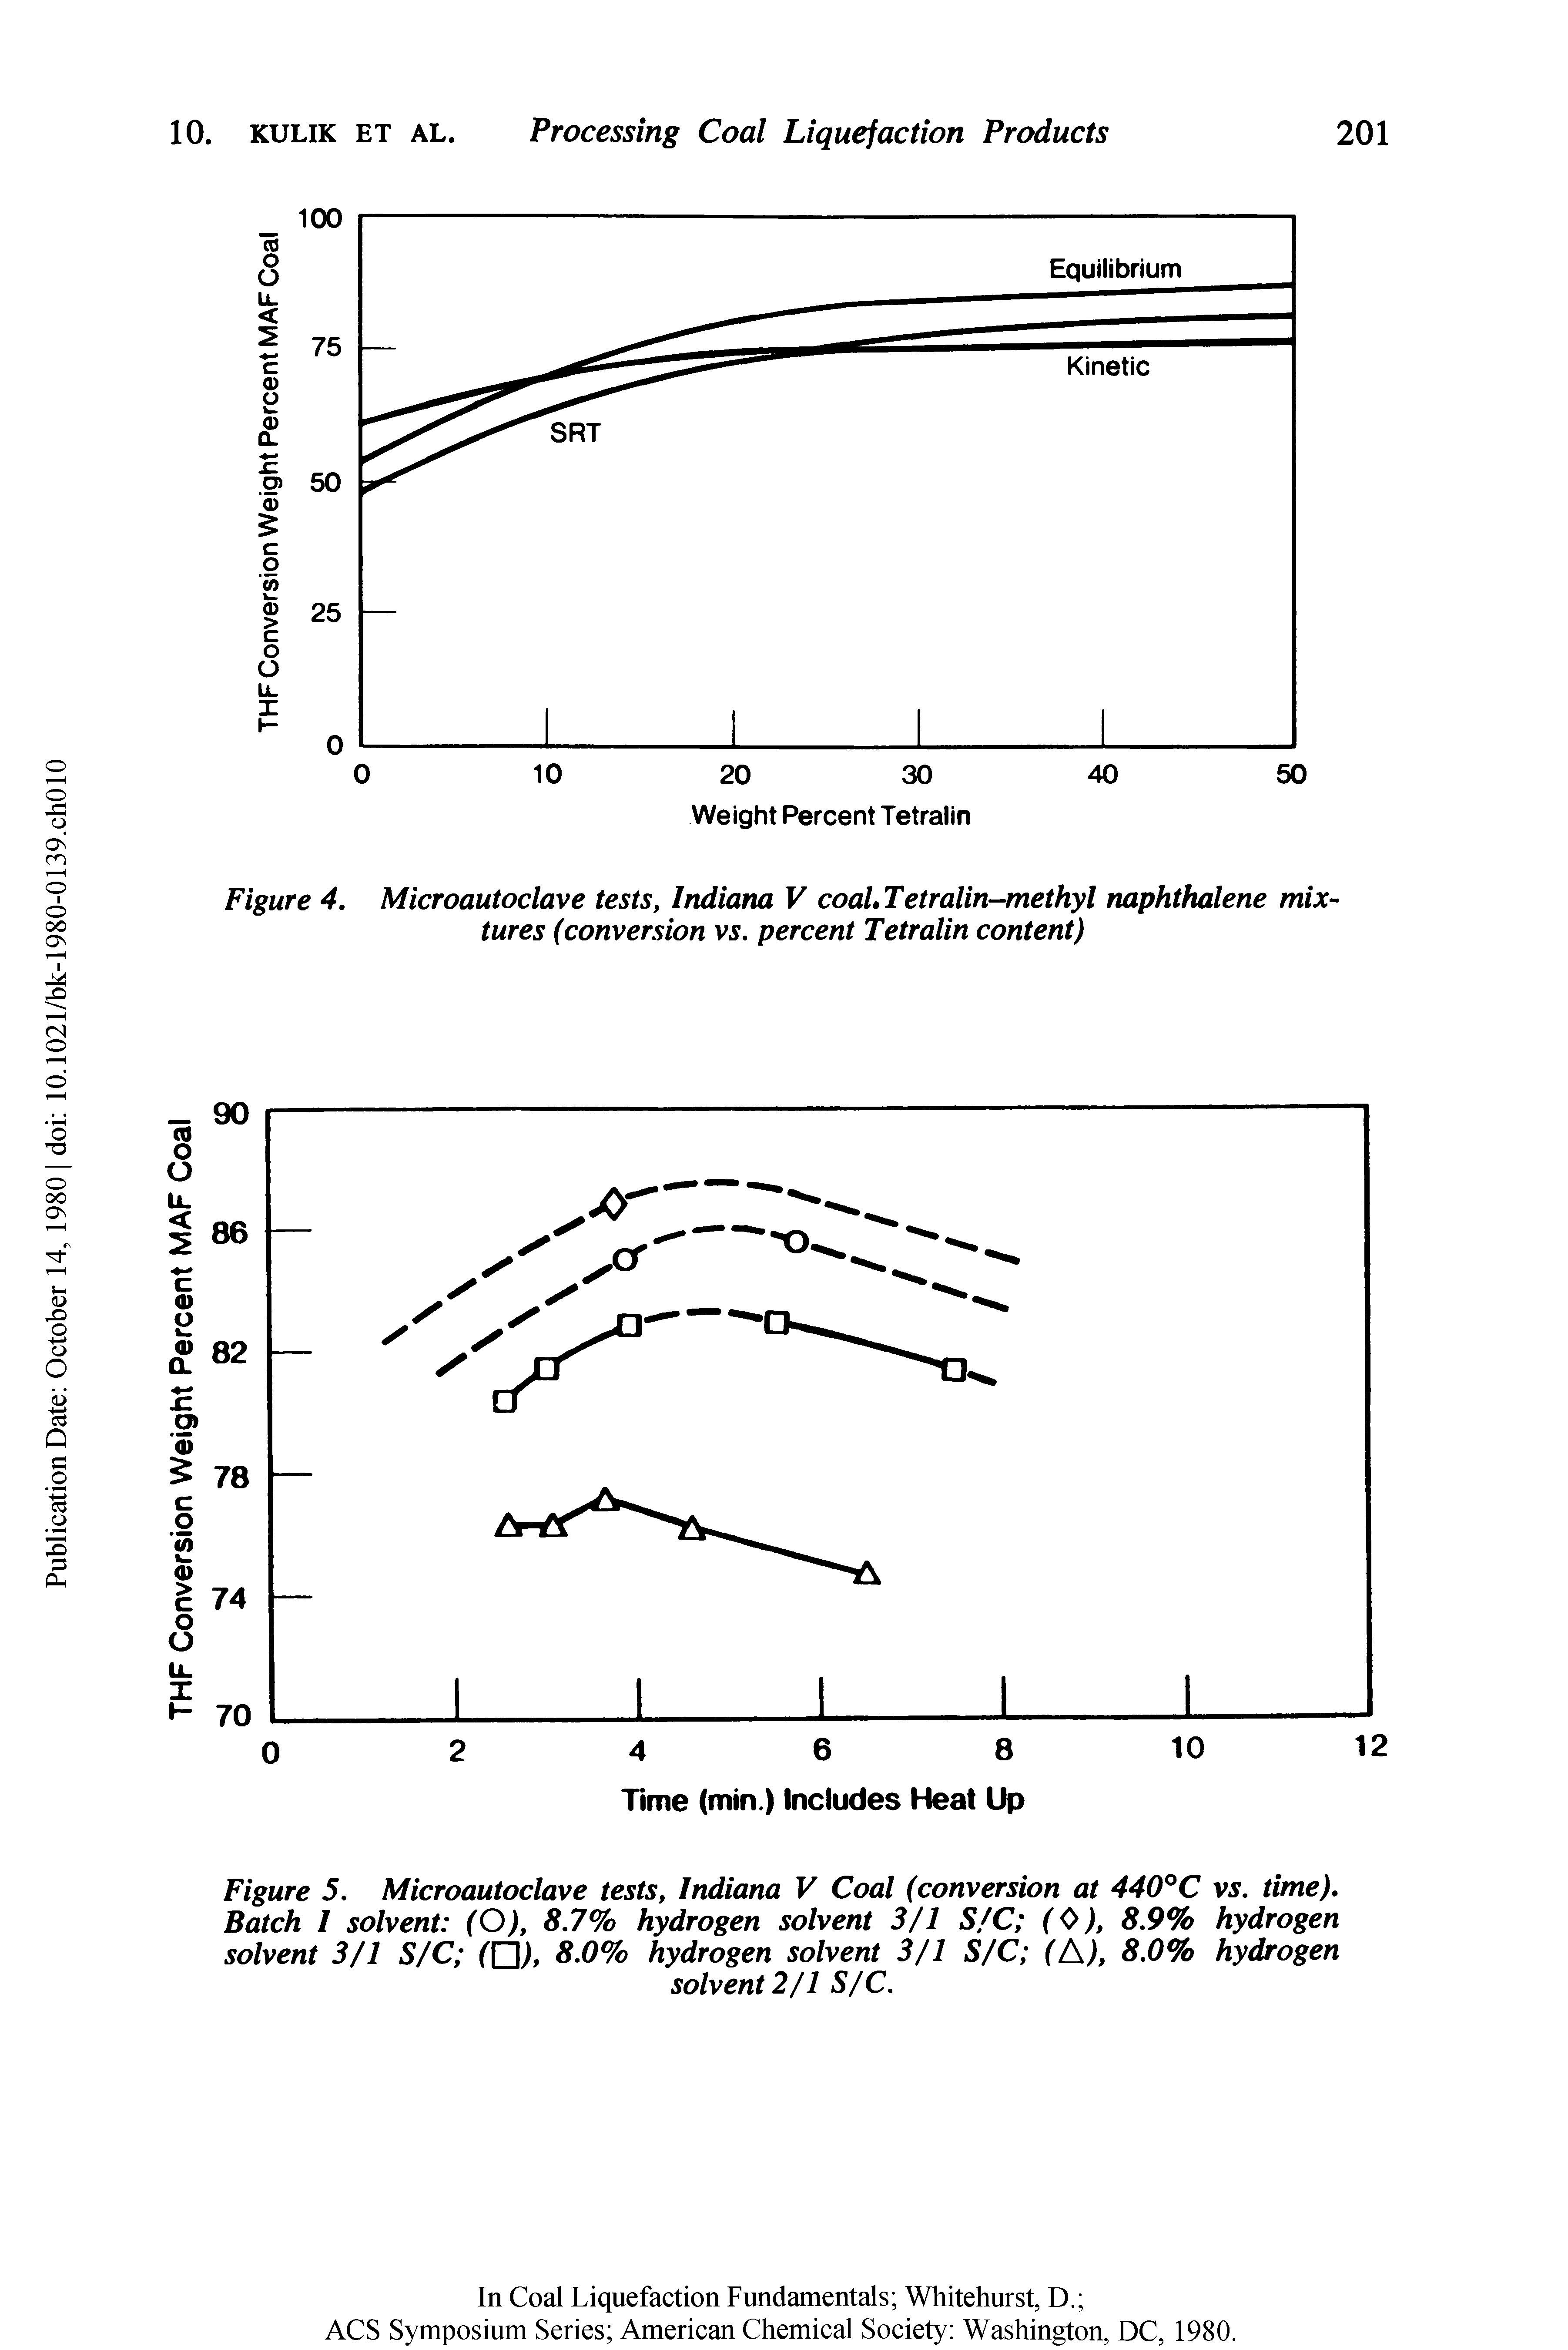 Figure 5. Microautoclave tests, Indiana V Coal (conversion at 440°C vs. time). Batch I solvent (O), 8.7% hydrogen solvent 3/1 S/C (0), 8.9% hydrogen solvent 3/1 S/C ([J), 8.0% hydrogen solvent 3/1 S/C (A), 8.0% hydrogen...